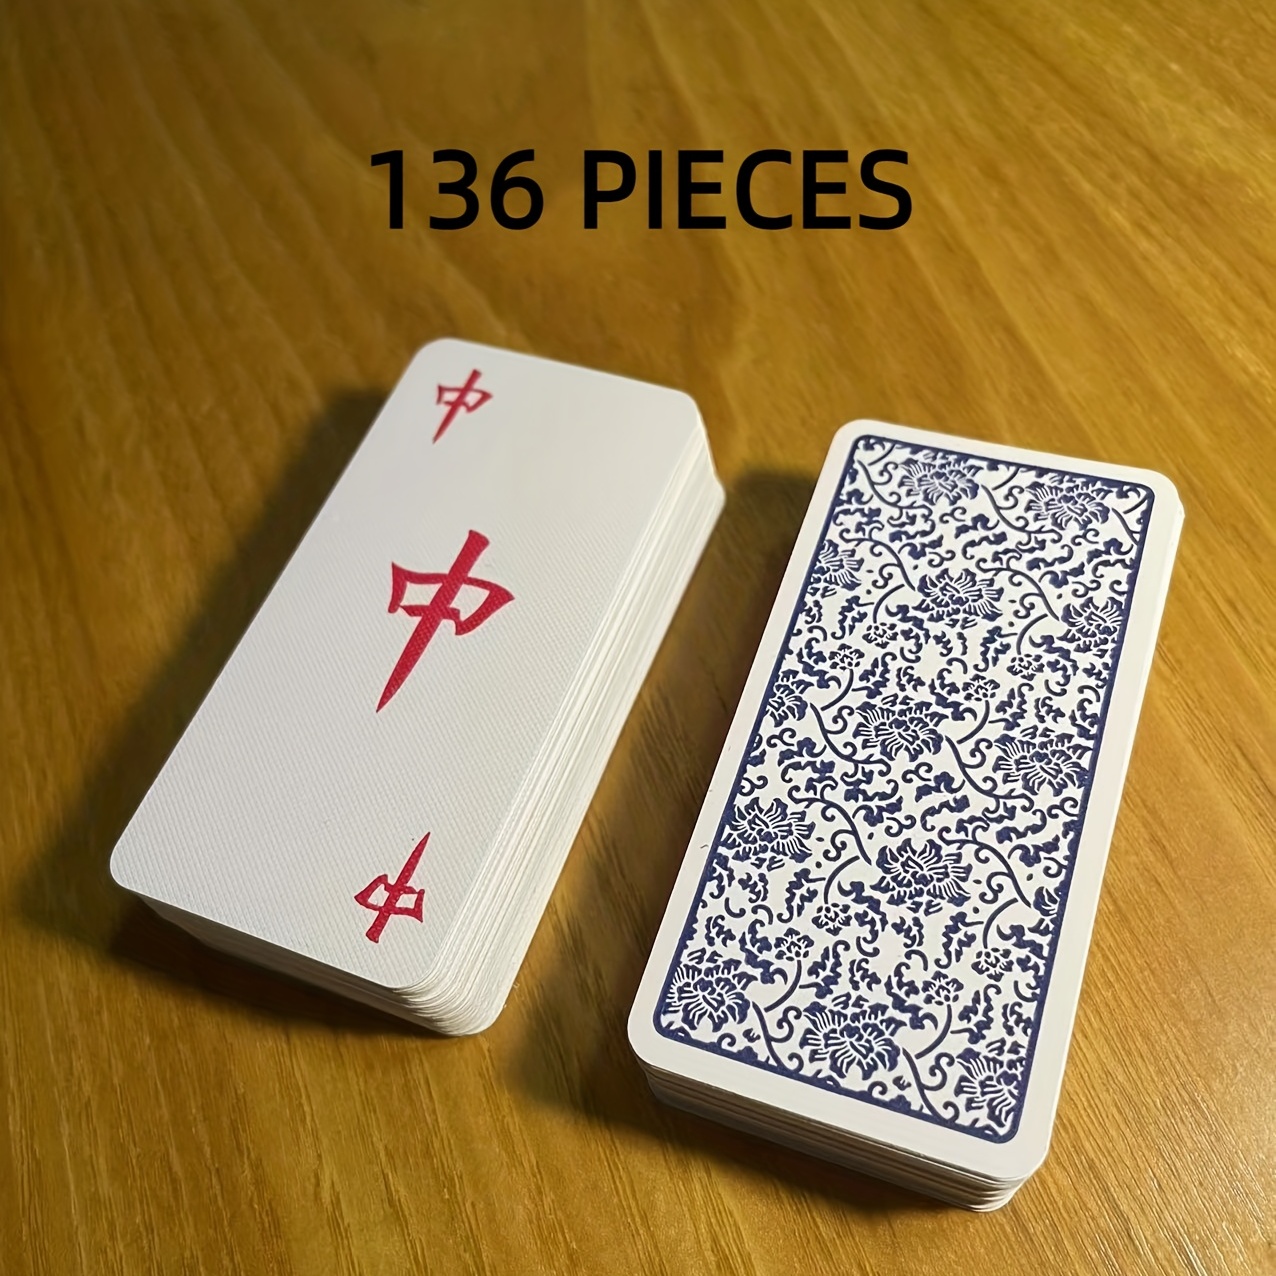 Traditional Mini Mahjong with Box, Friend Gathering Game, Family Game, Table